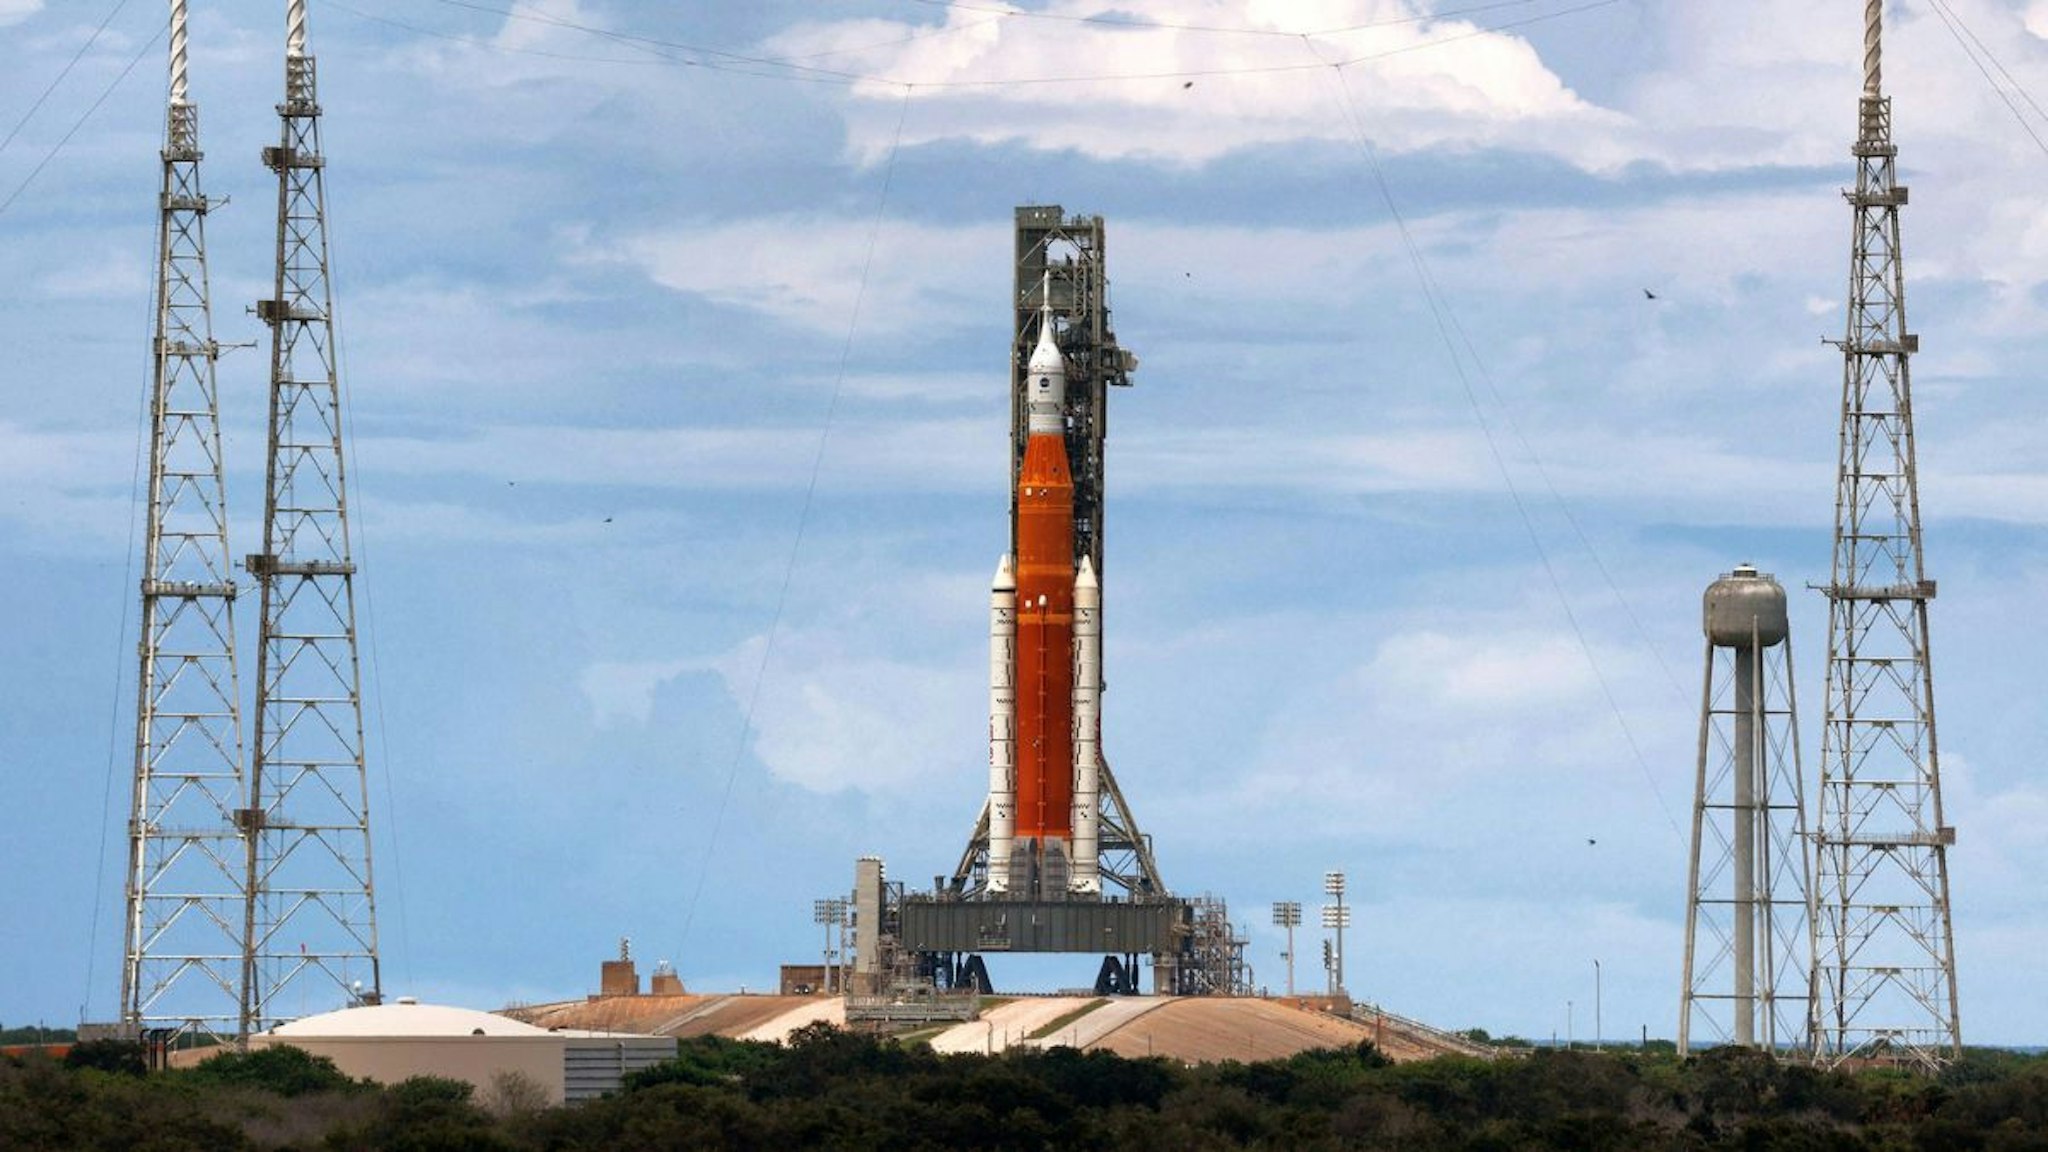 Artemis I, NASA&apos;s Space Launch System heavy-lift rocket carrying the Orion spacecraft, sits at Launch Pad 39-B at Kennedy Space Center, Florida, on Sunday, Aug. 28, 2022.